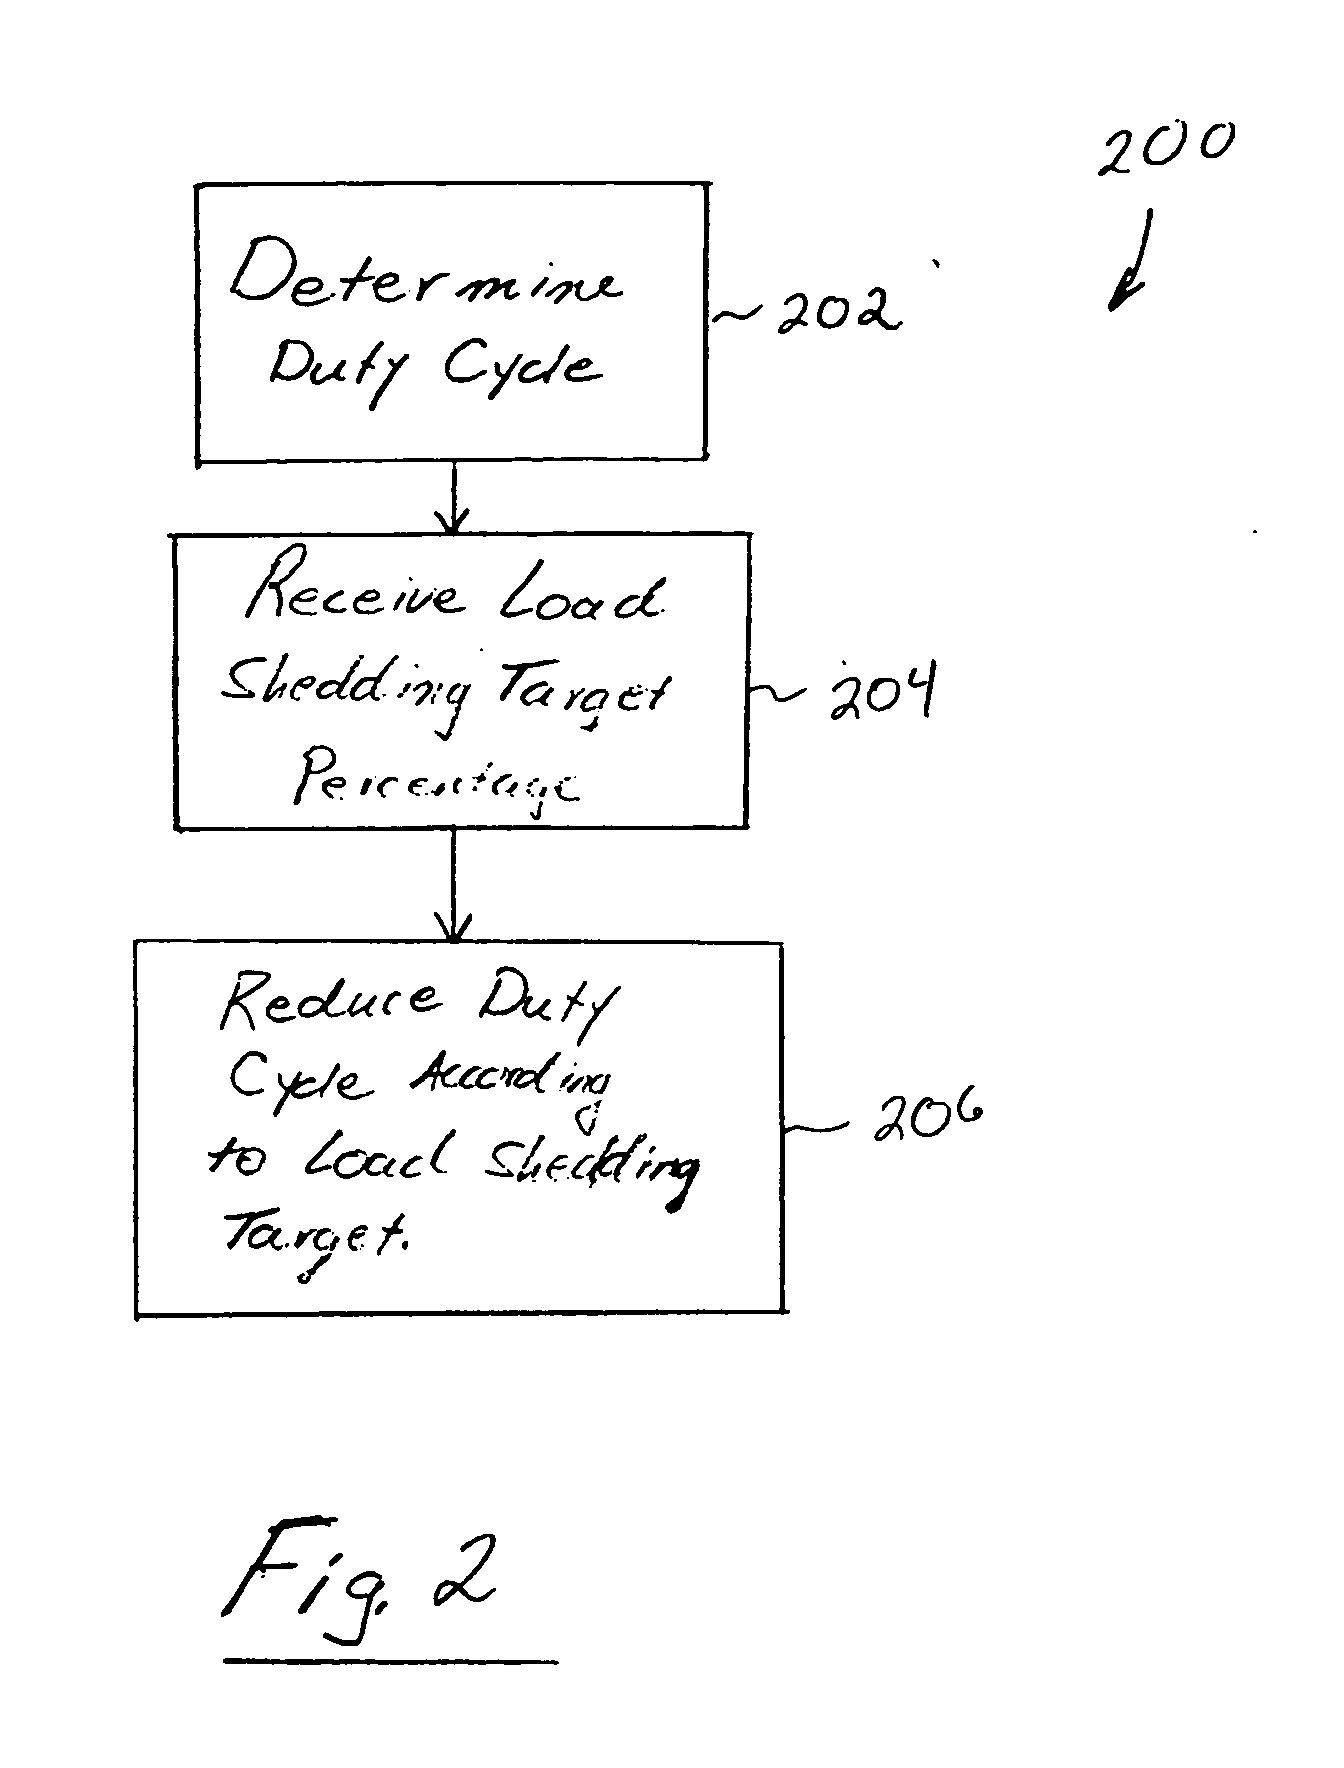 Load shedding control for cycled or variable load appliances